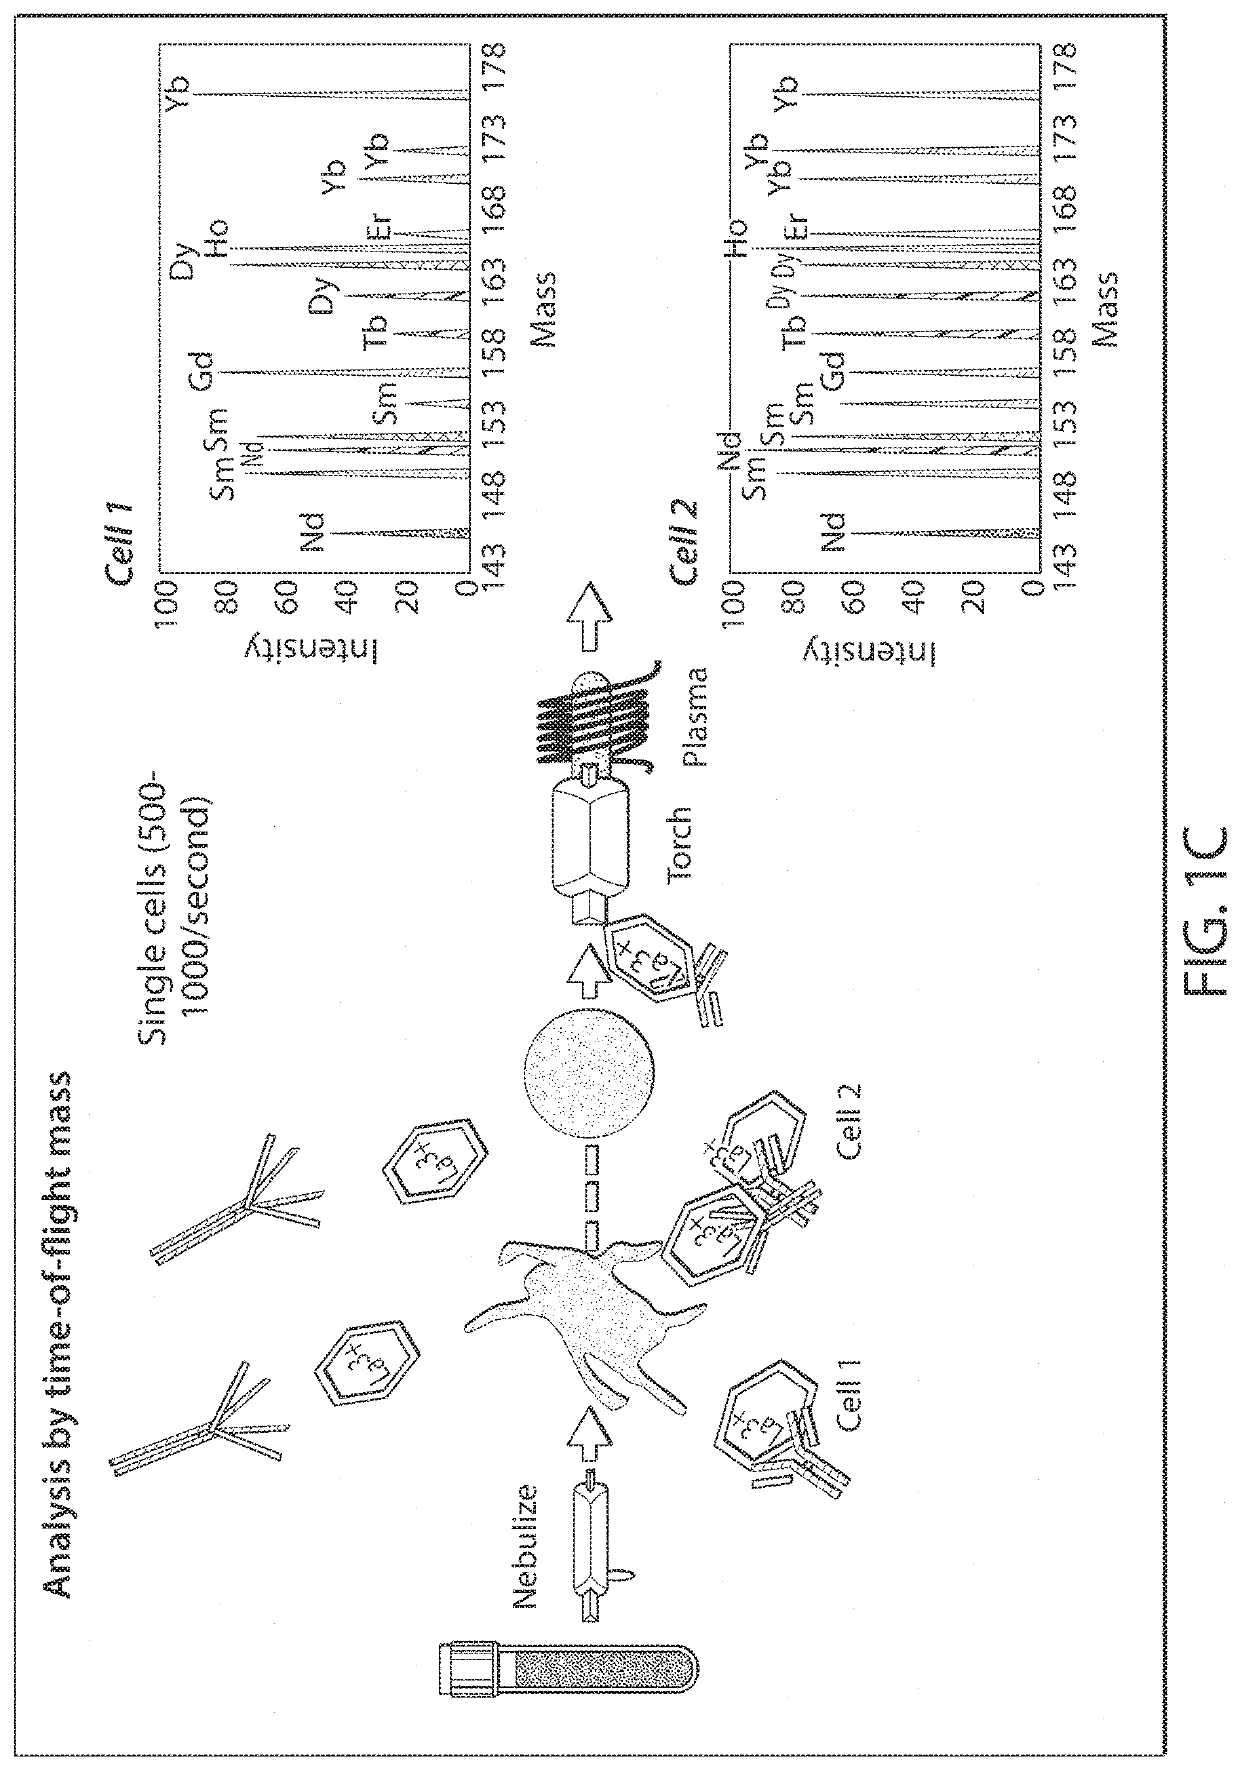 Methods and compositions for analyzing platelets by mass cytometry